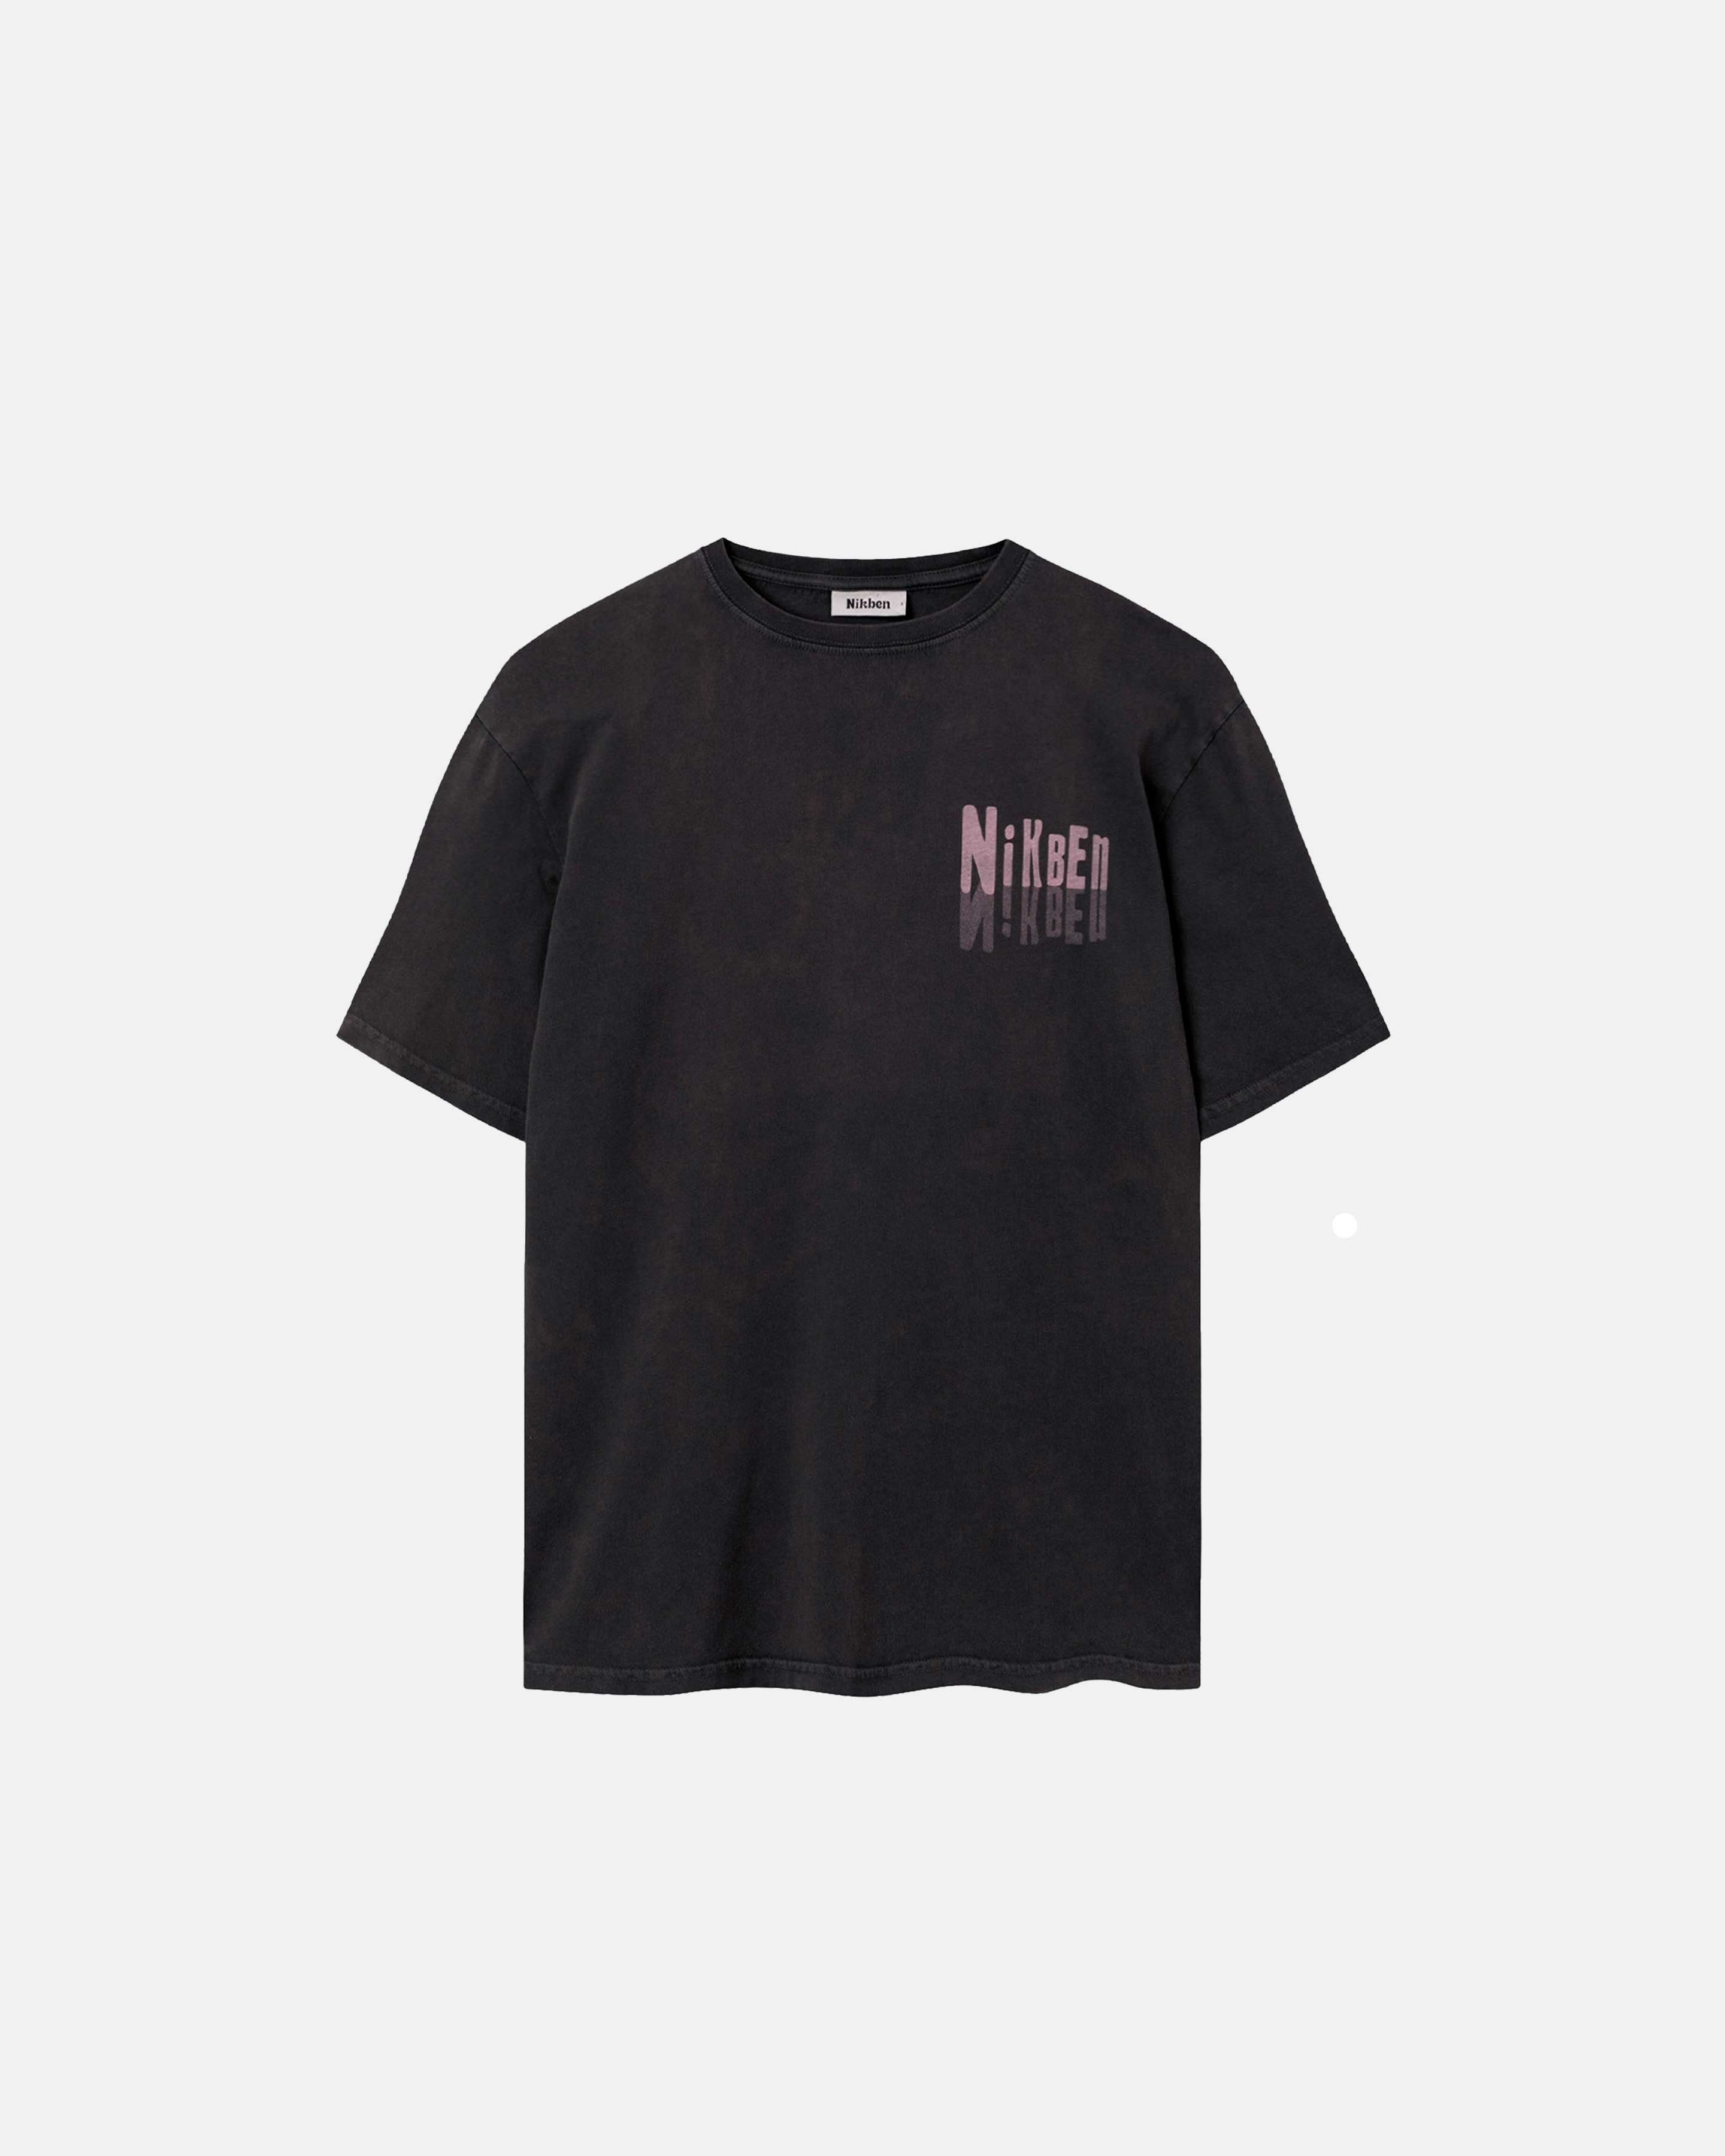 Washed black t-shirt with a pink 